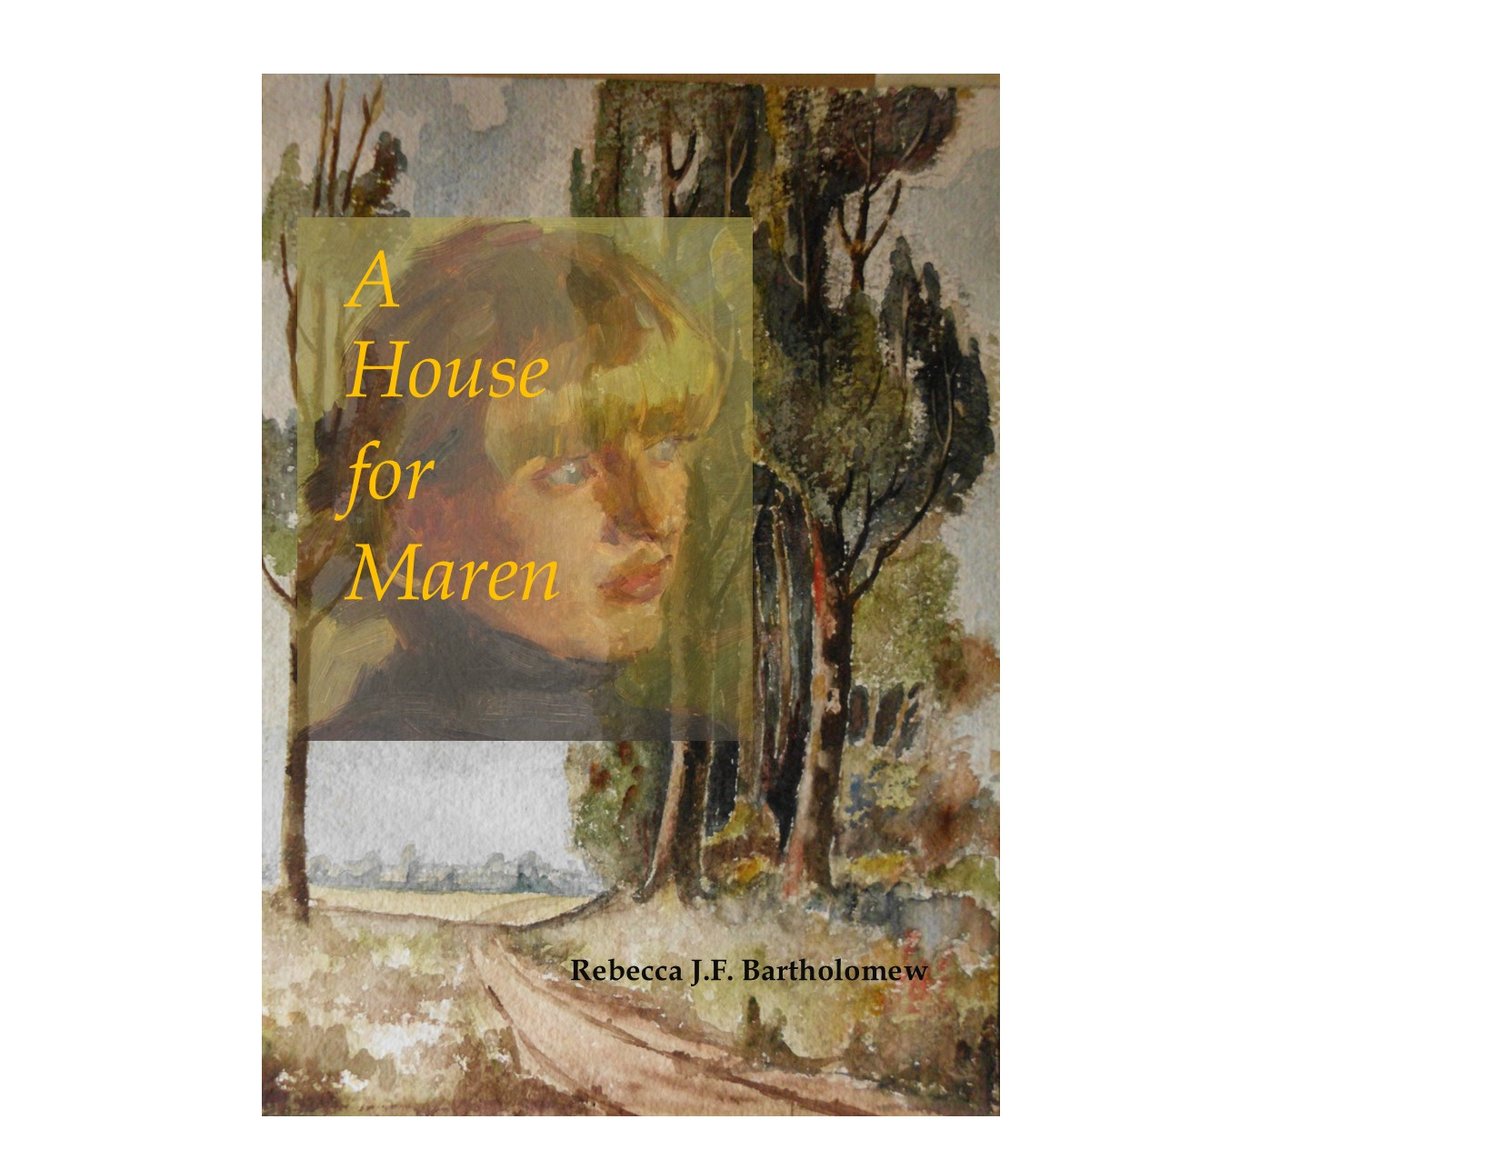 “A House for Maren” is 563 pages and is available in paperback for $16.95 on Amazon. The book will be released as an ebook in December.